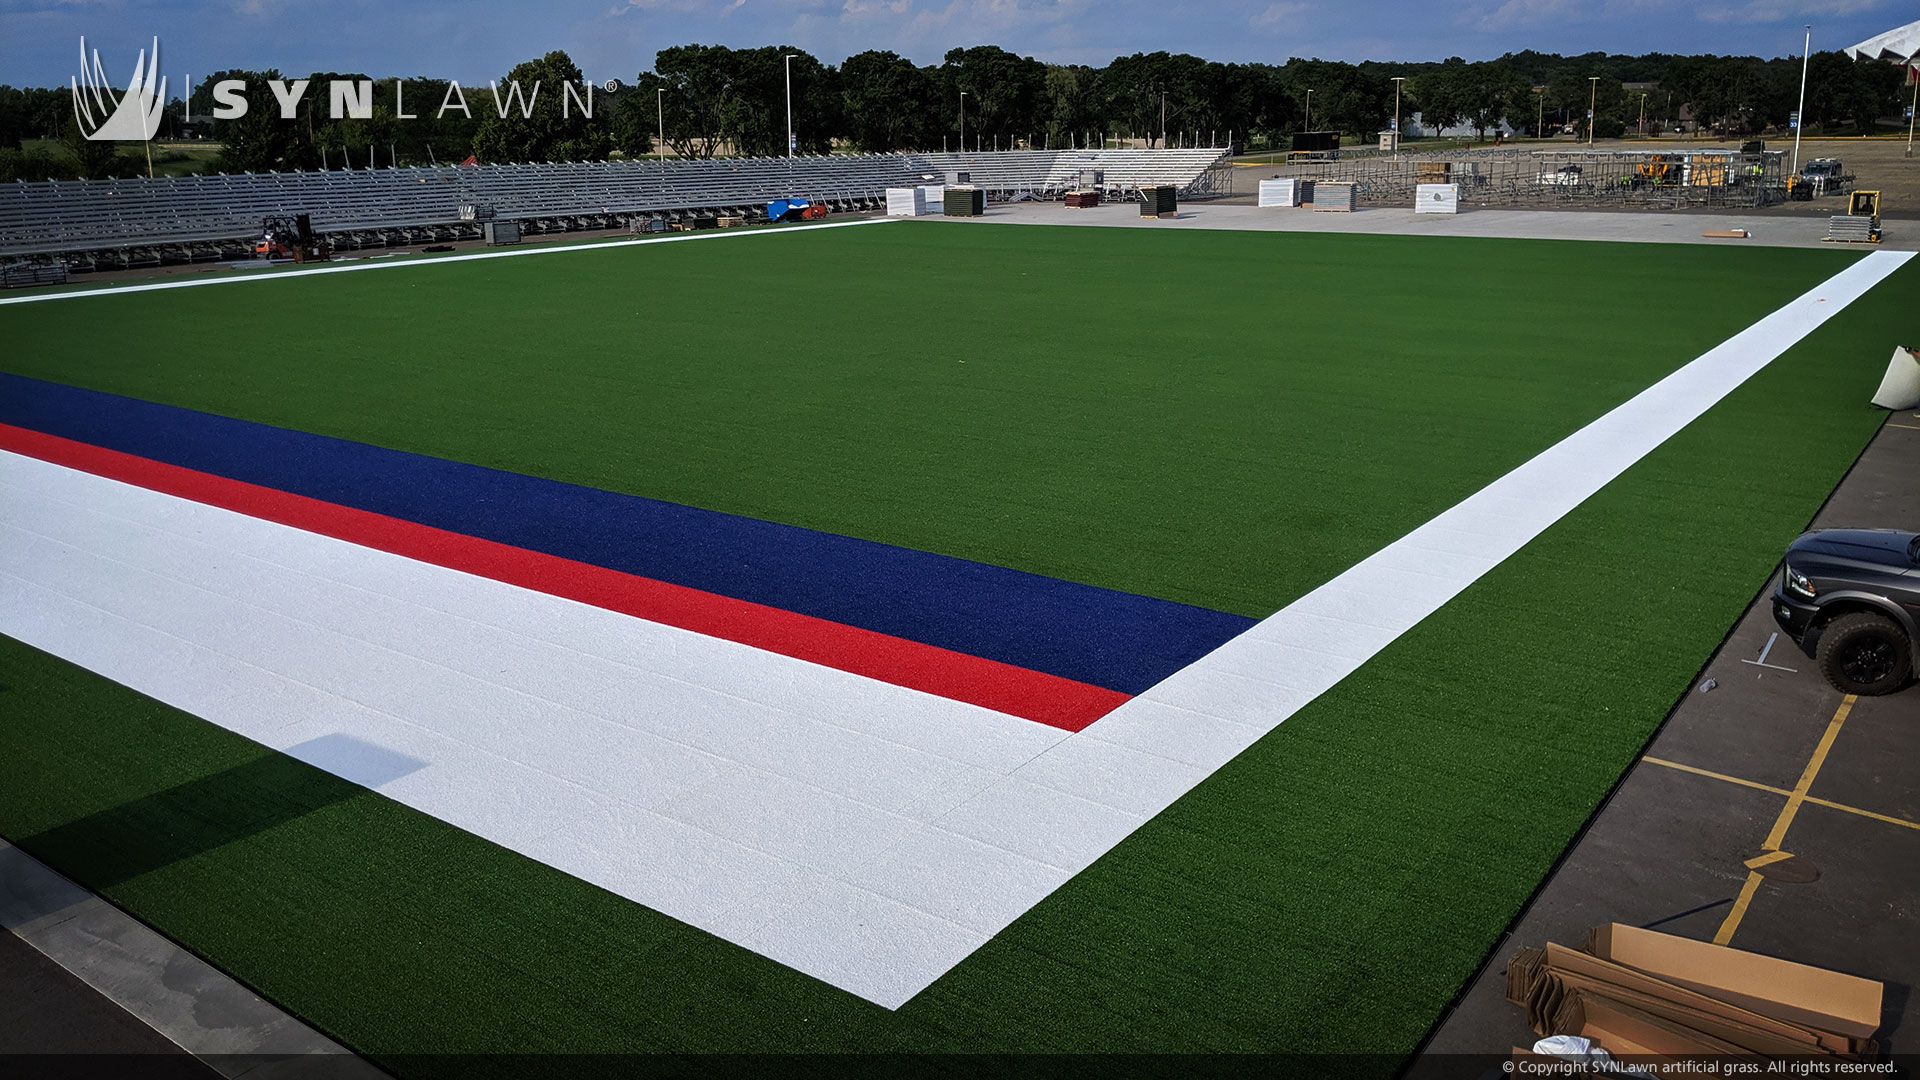 image of synlawn modular turf system at the crossfit games 20191